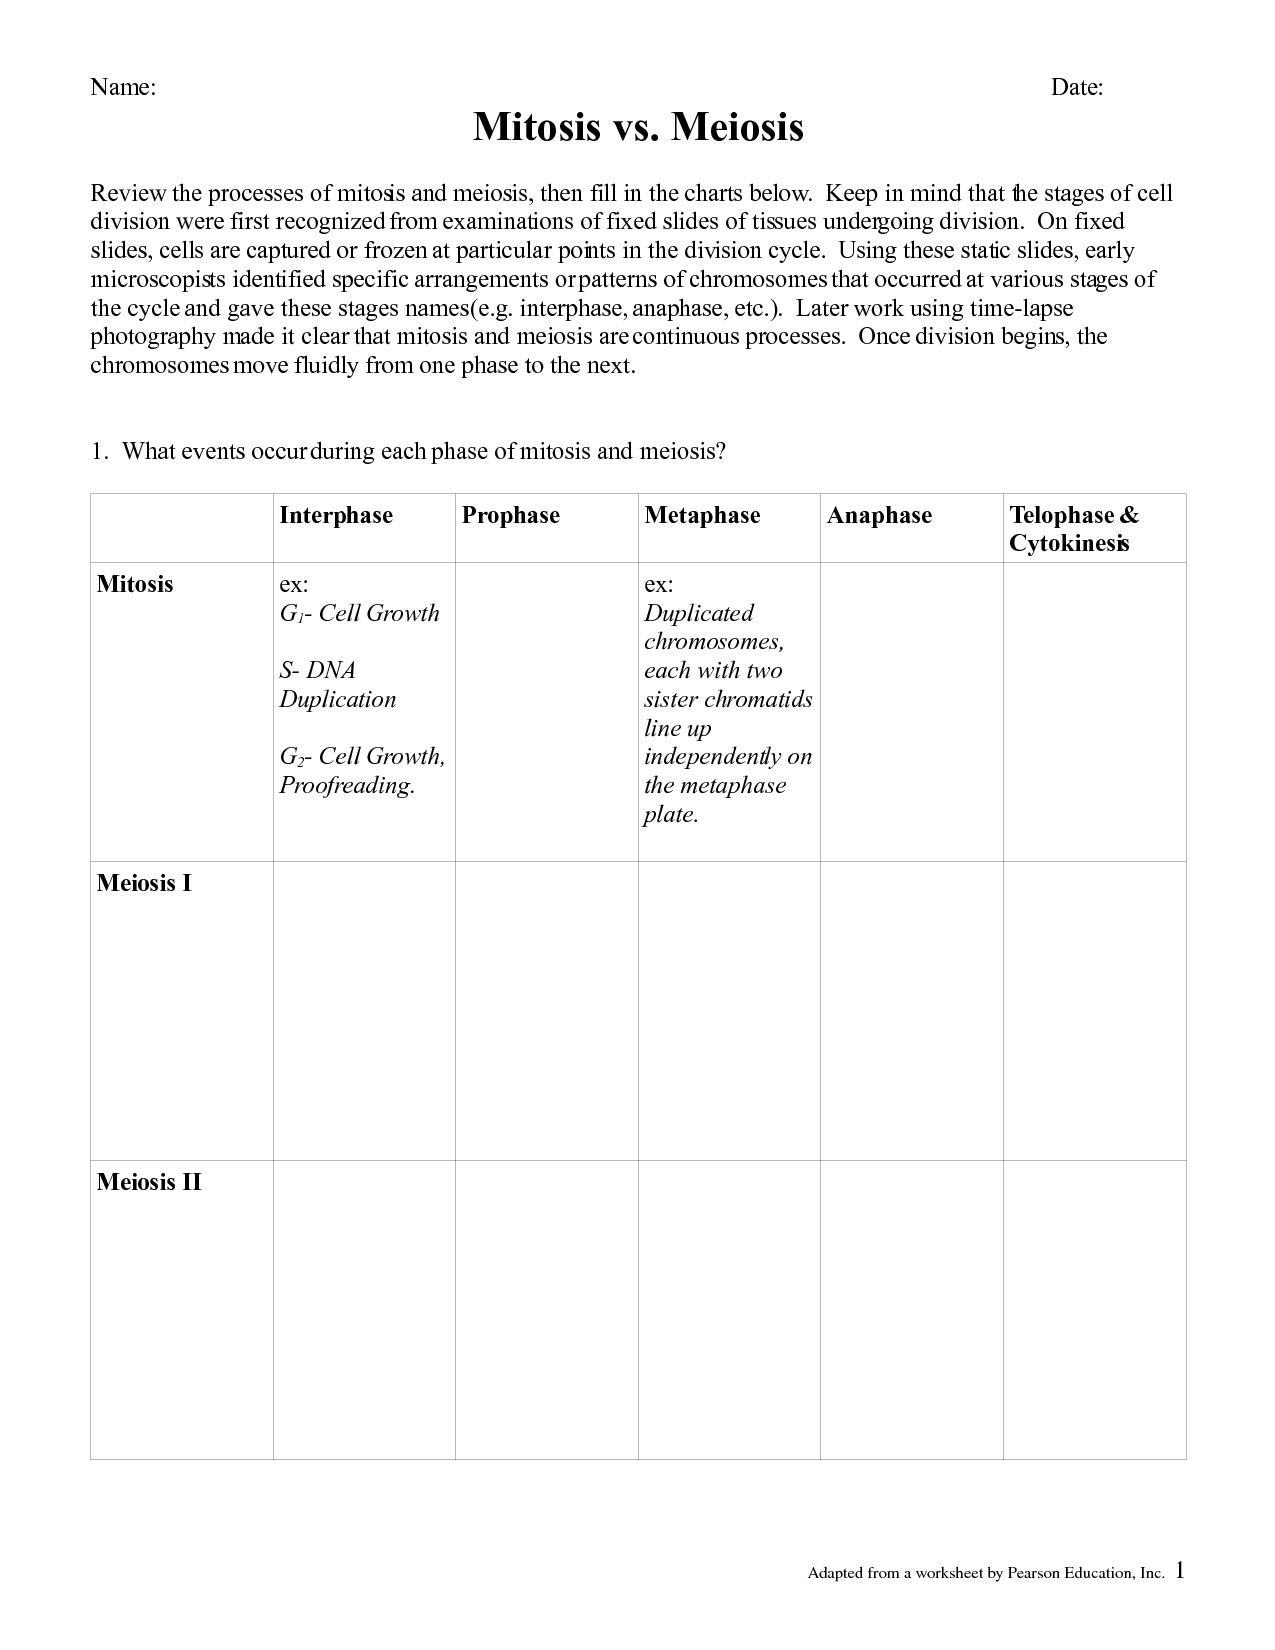 mitosis-and-meiosis-worksheet-answer-key-db-excel